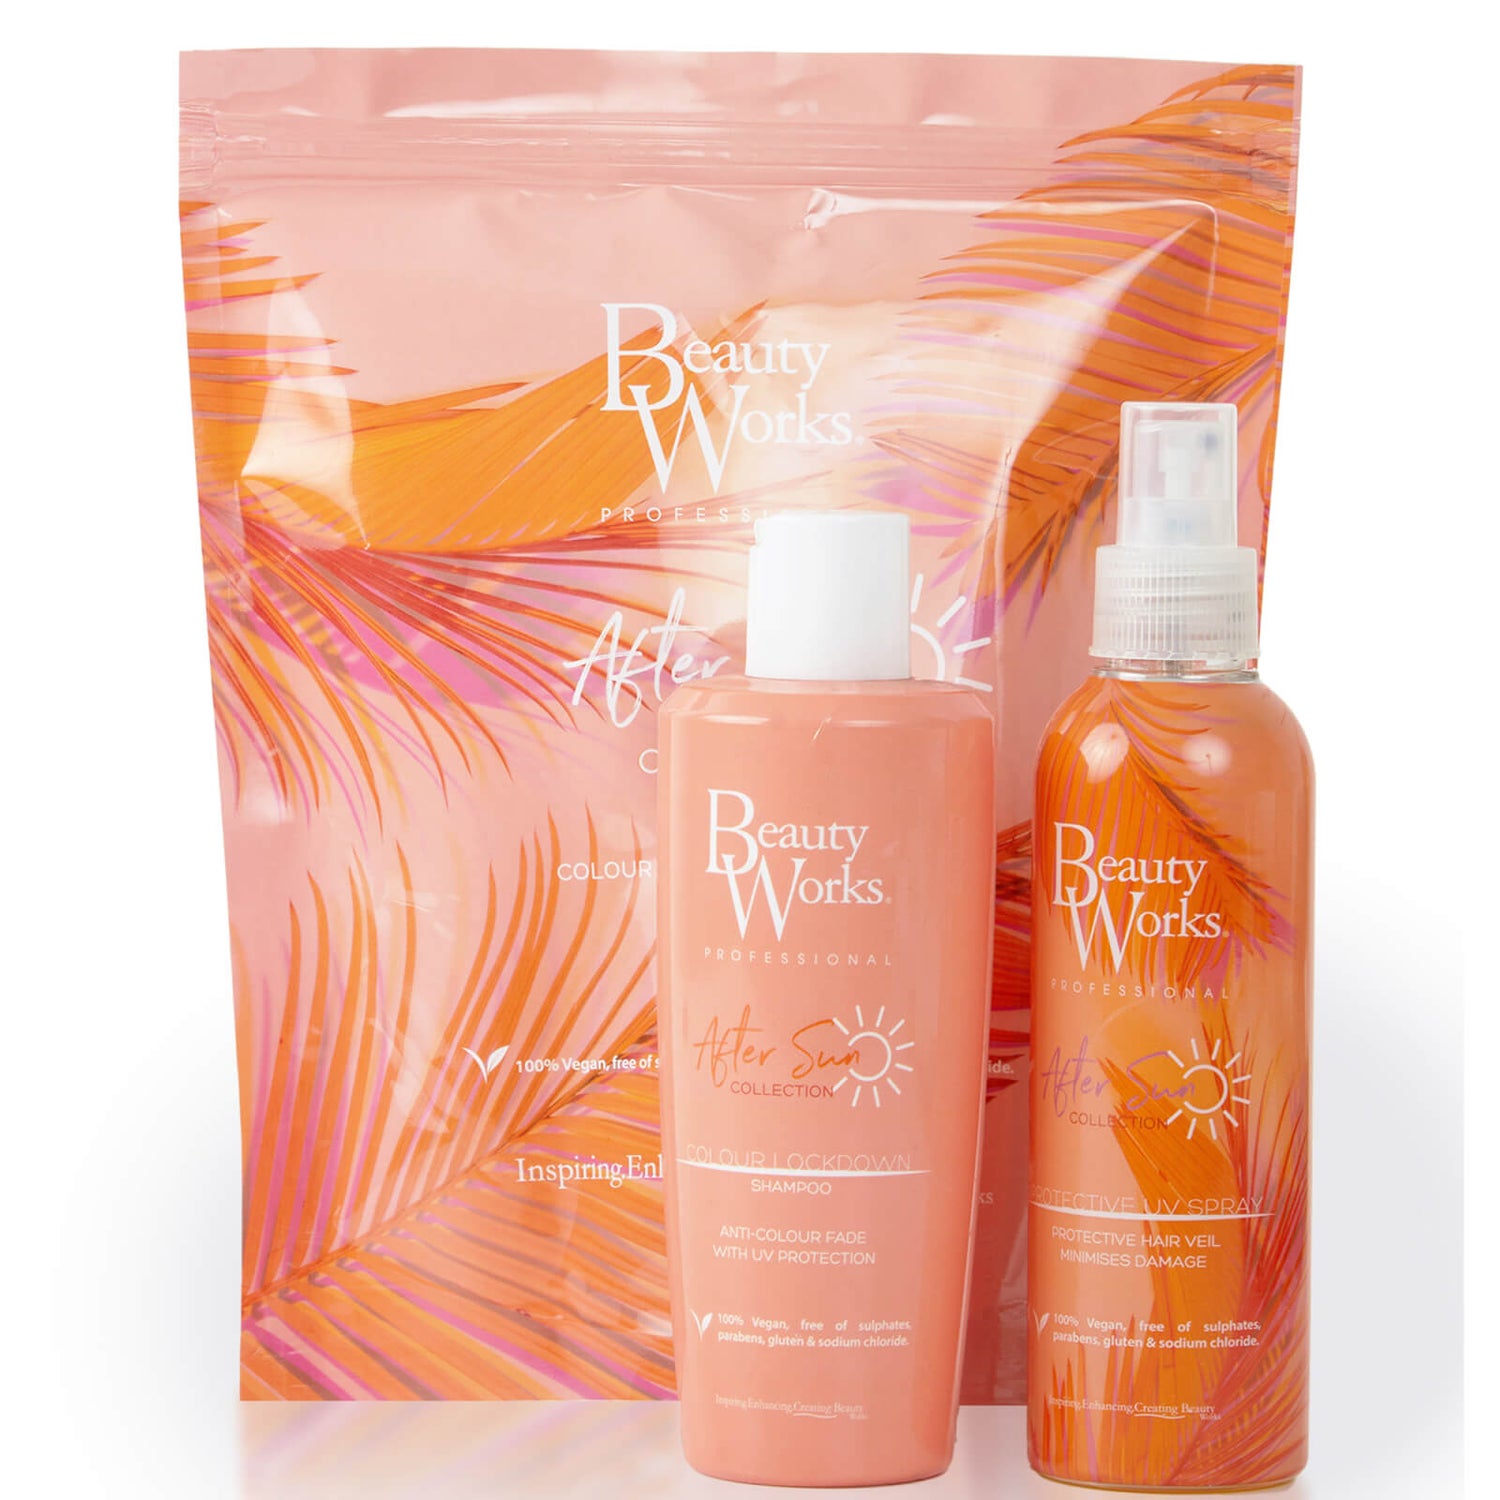 Beauty Works After Sun Anti-Colour Fade Duo (Worth £24.98)